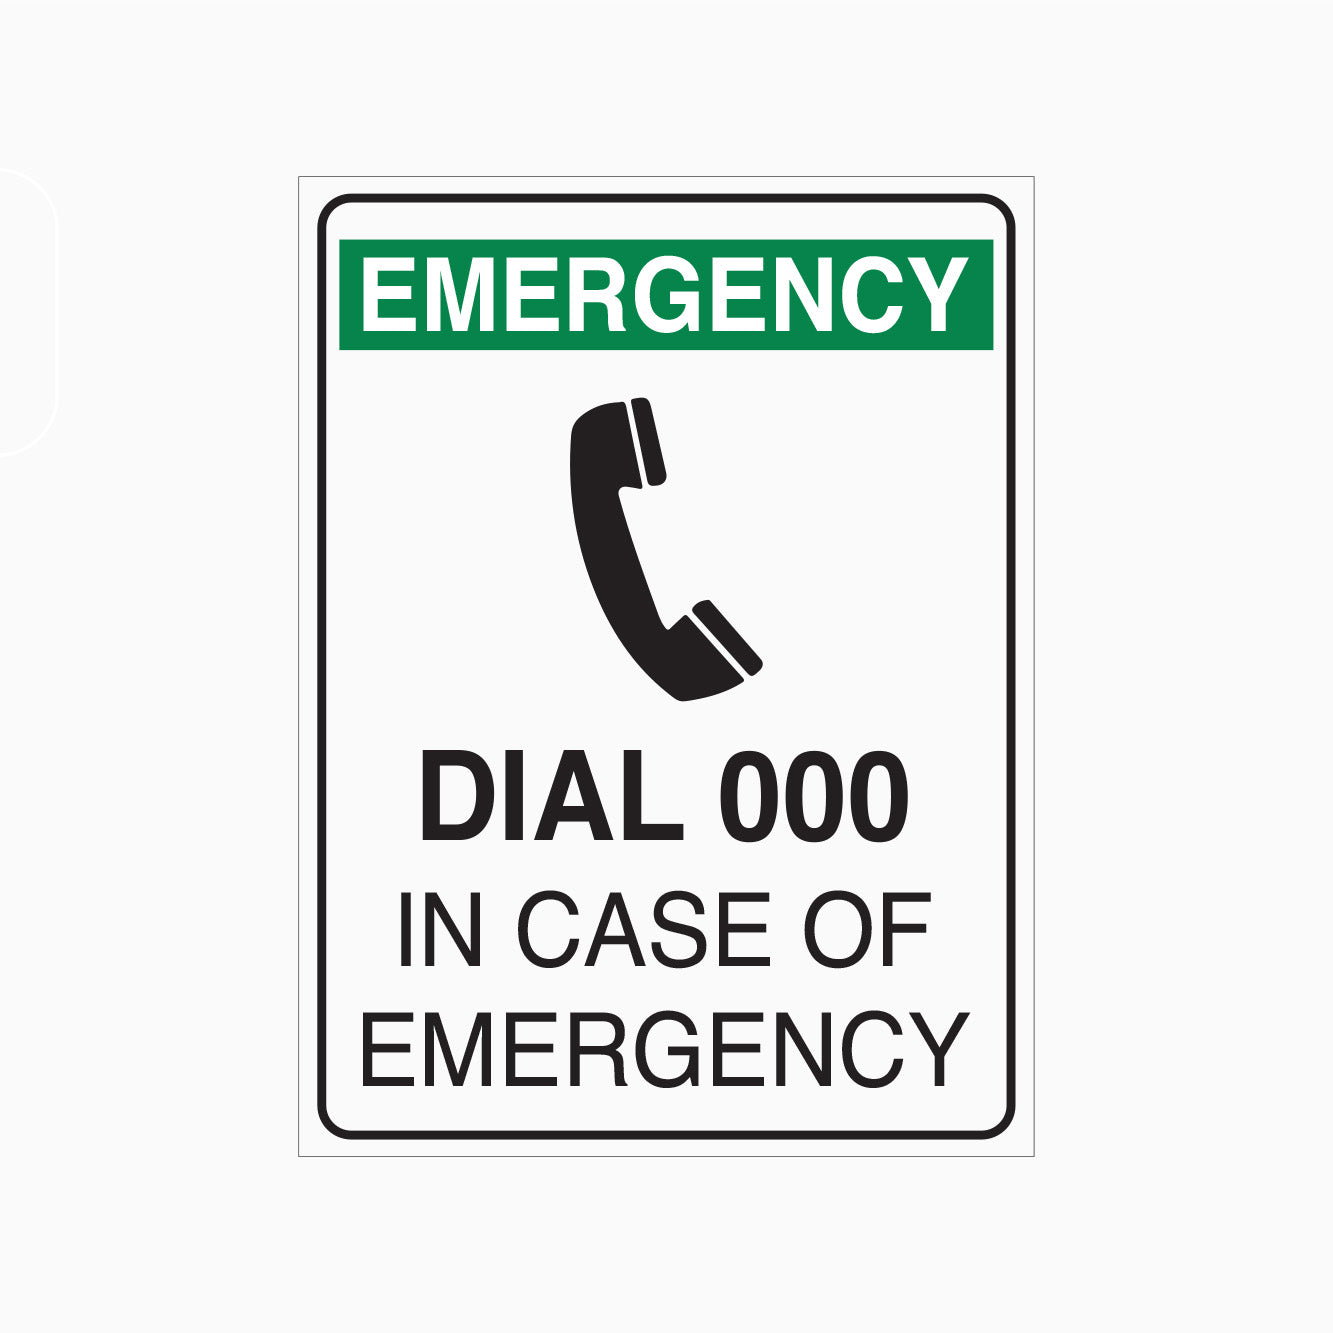 EMERGENCY SIGN - DIAL 000 IN CASE OF EMERGENCY SIGN